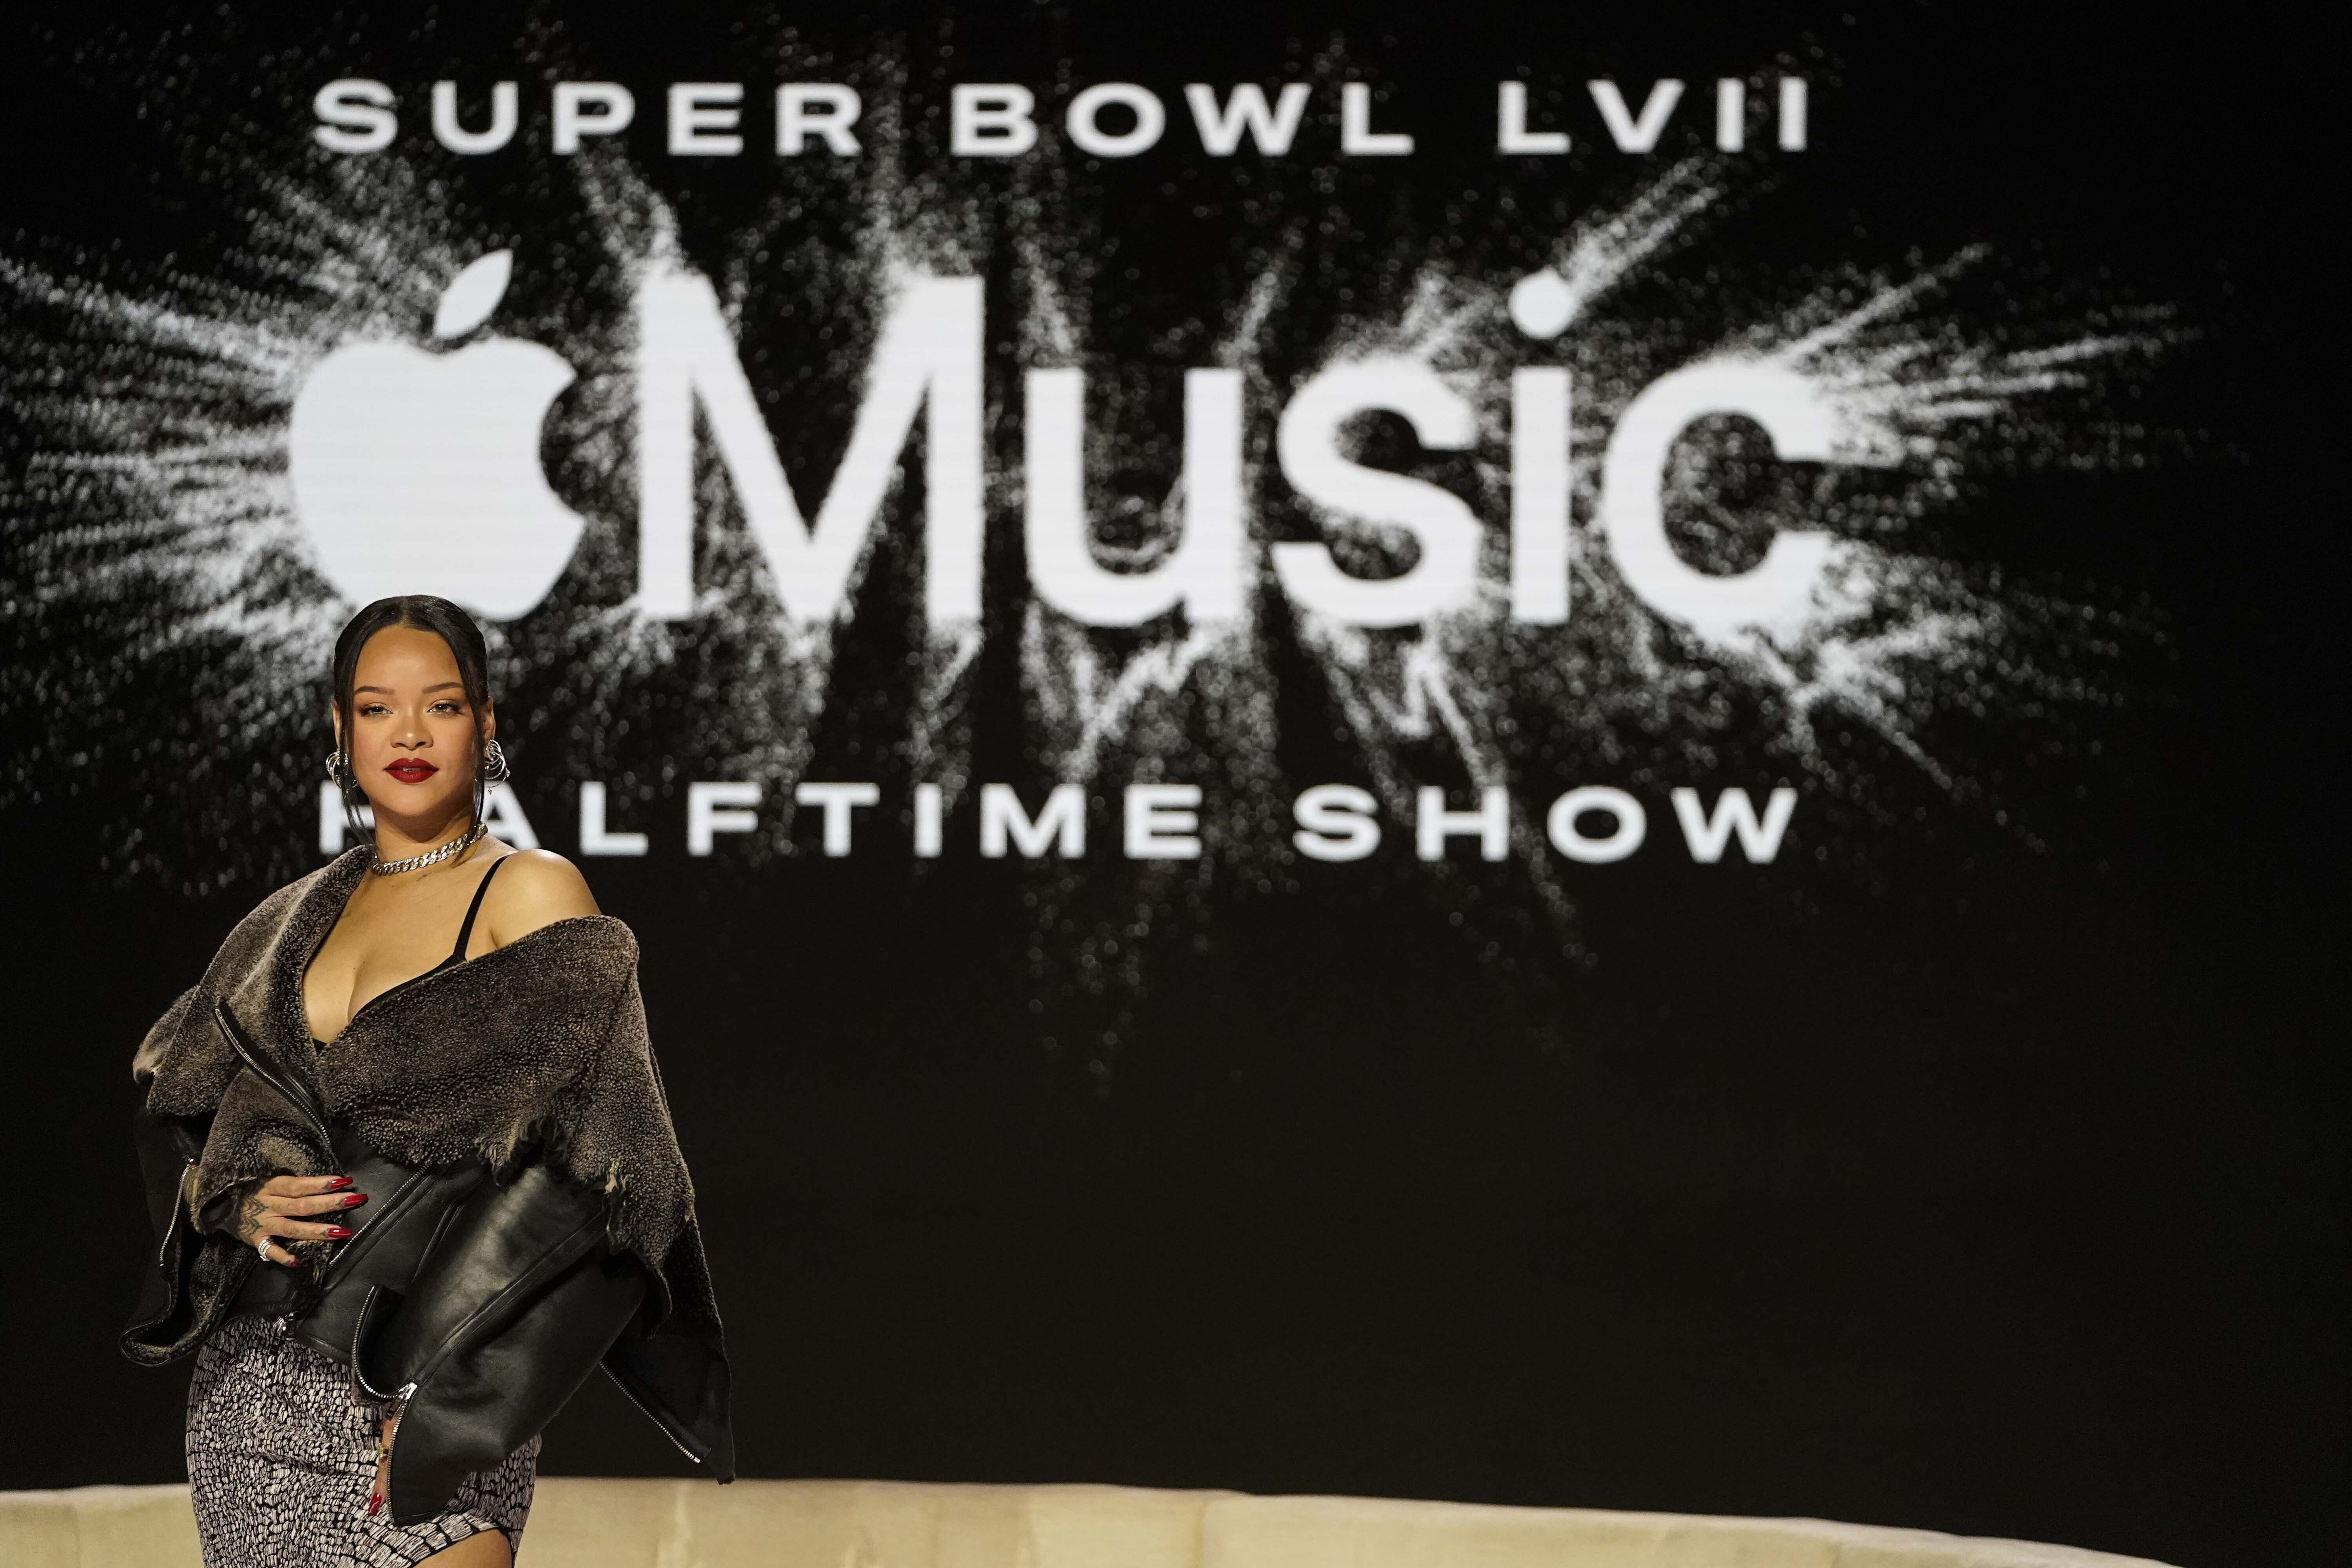 REPLAY: Beyonce's Super Bowl halftime show – The News Herald